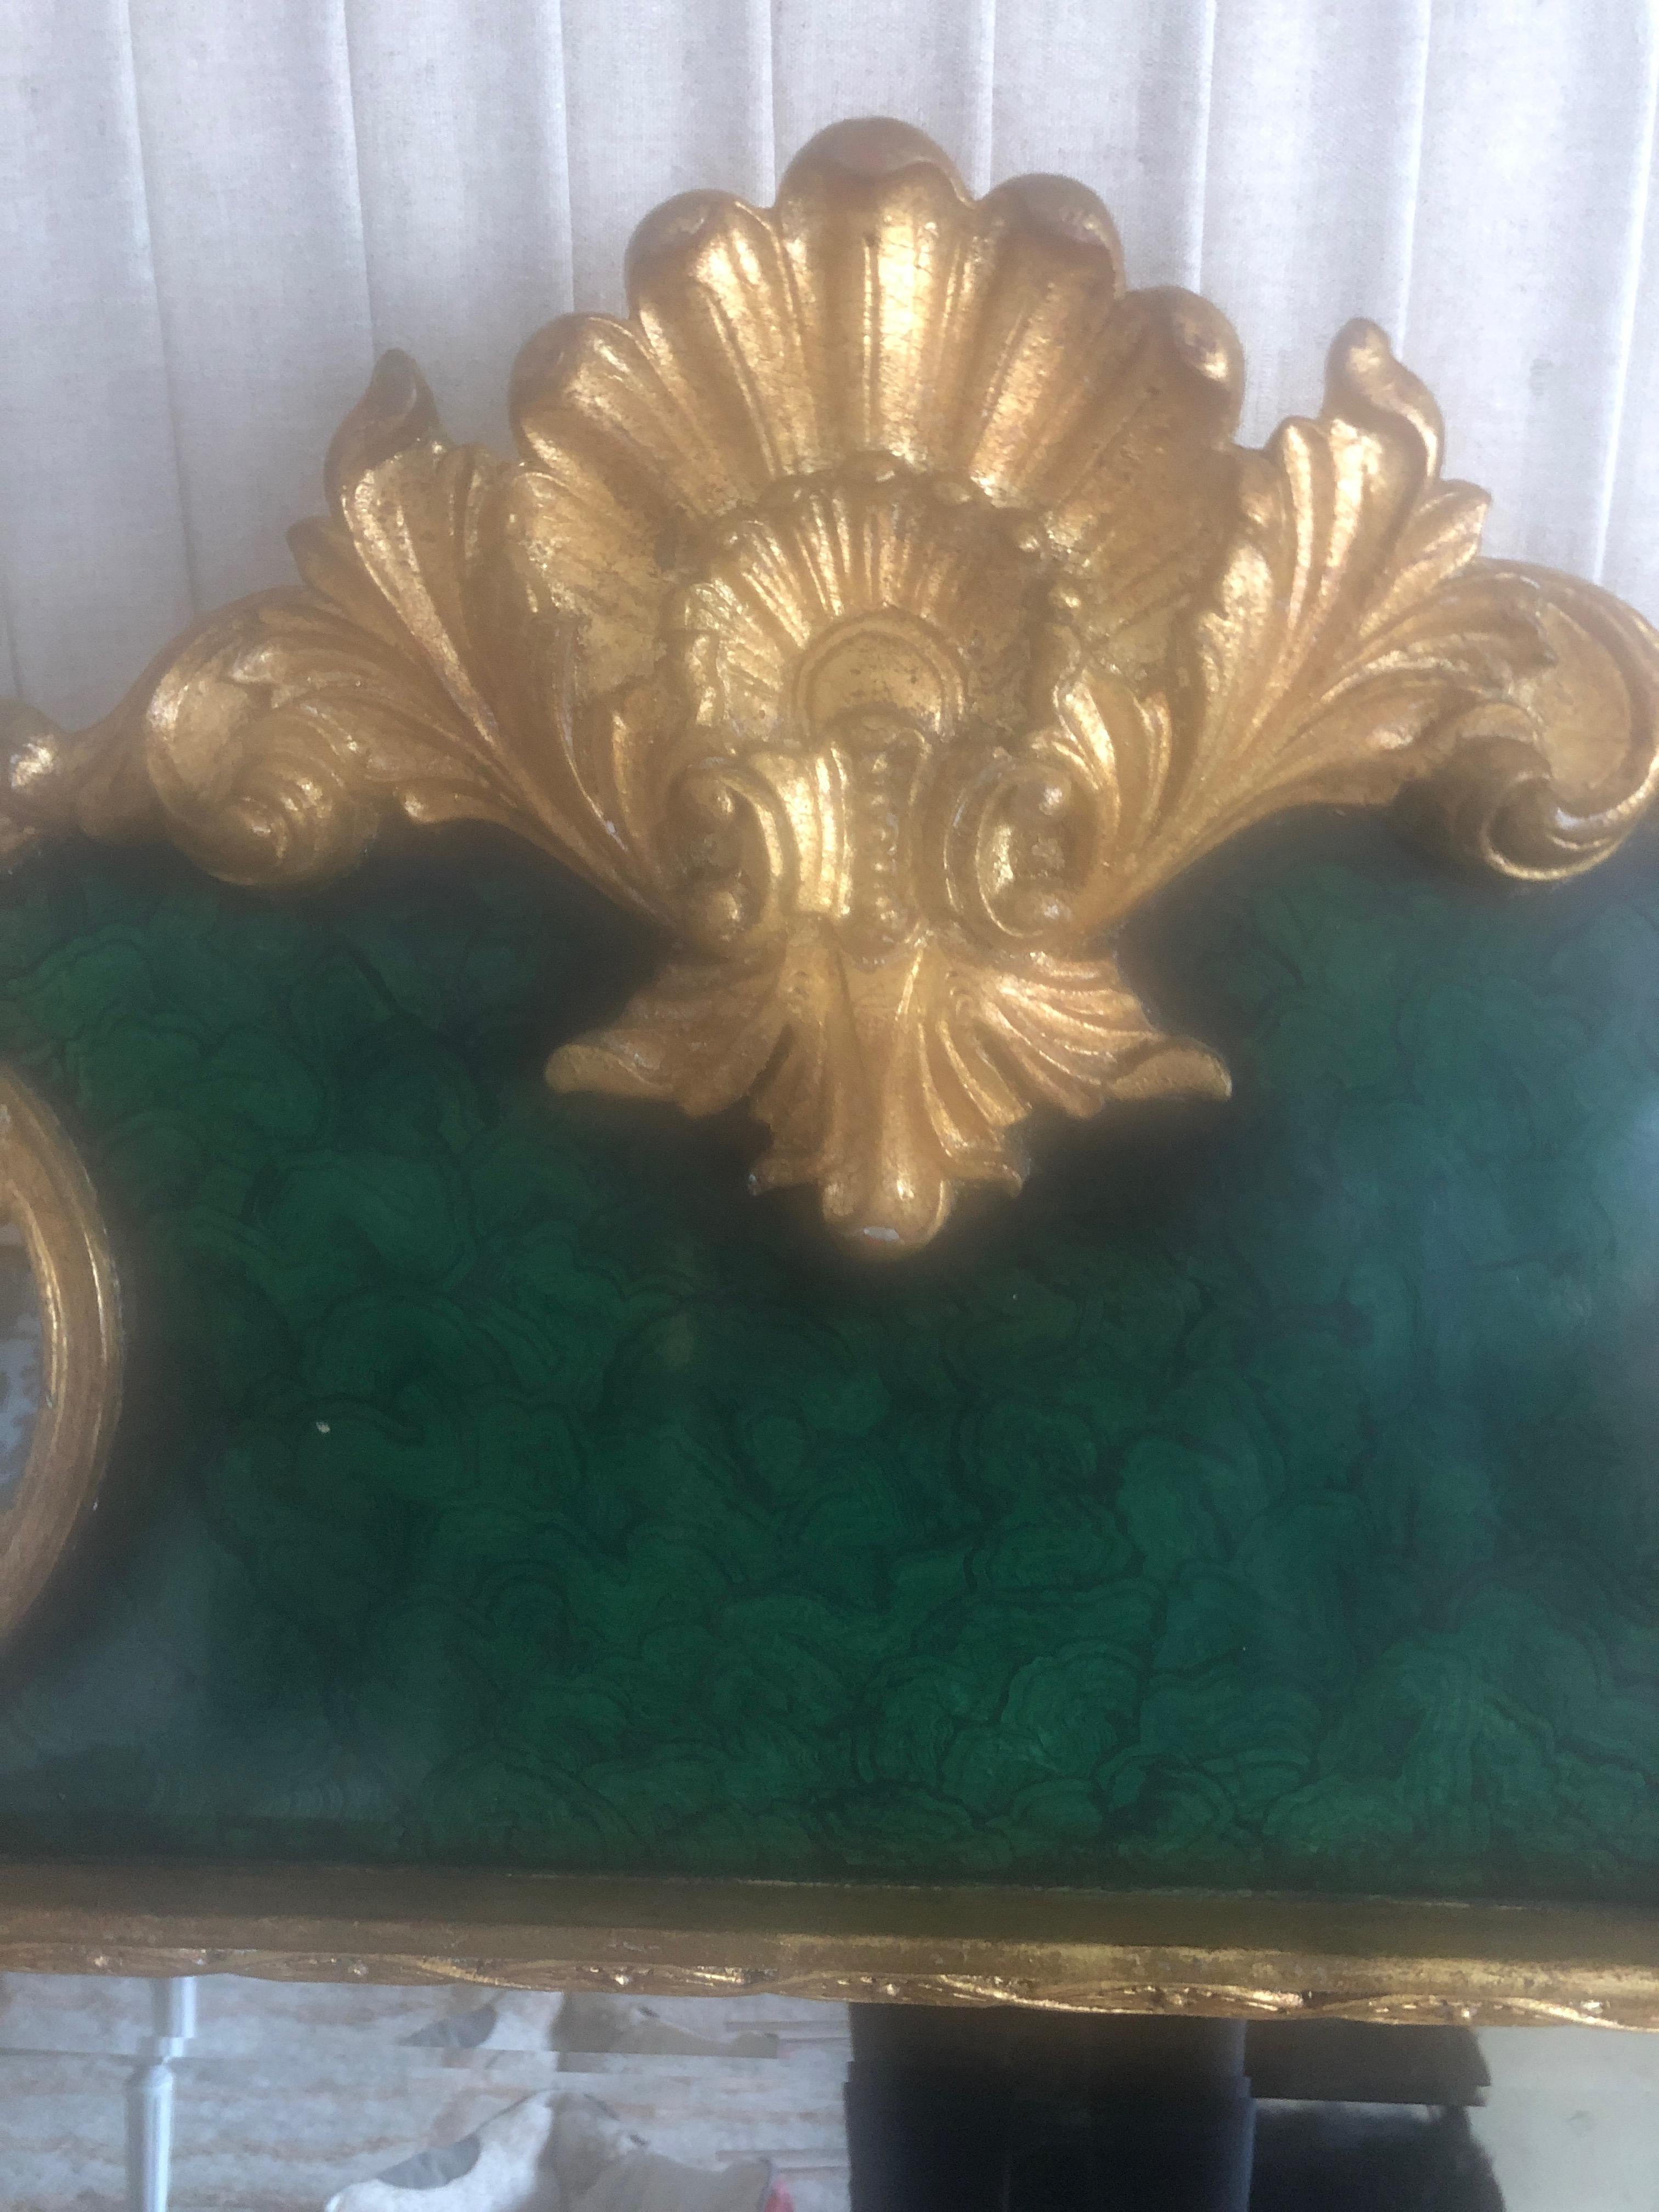 Eye-catching elegant French style mirror having a faux malachite frame in a gorgeous shade of green with glistening gilded details.